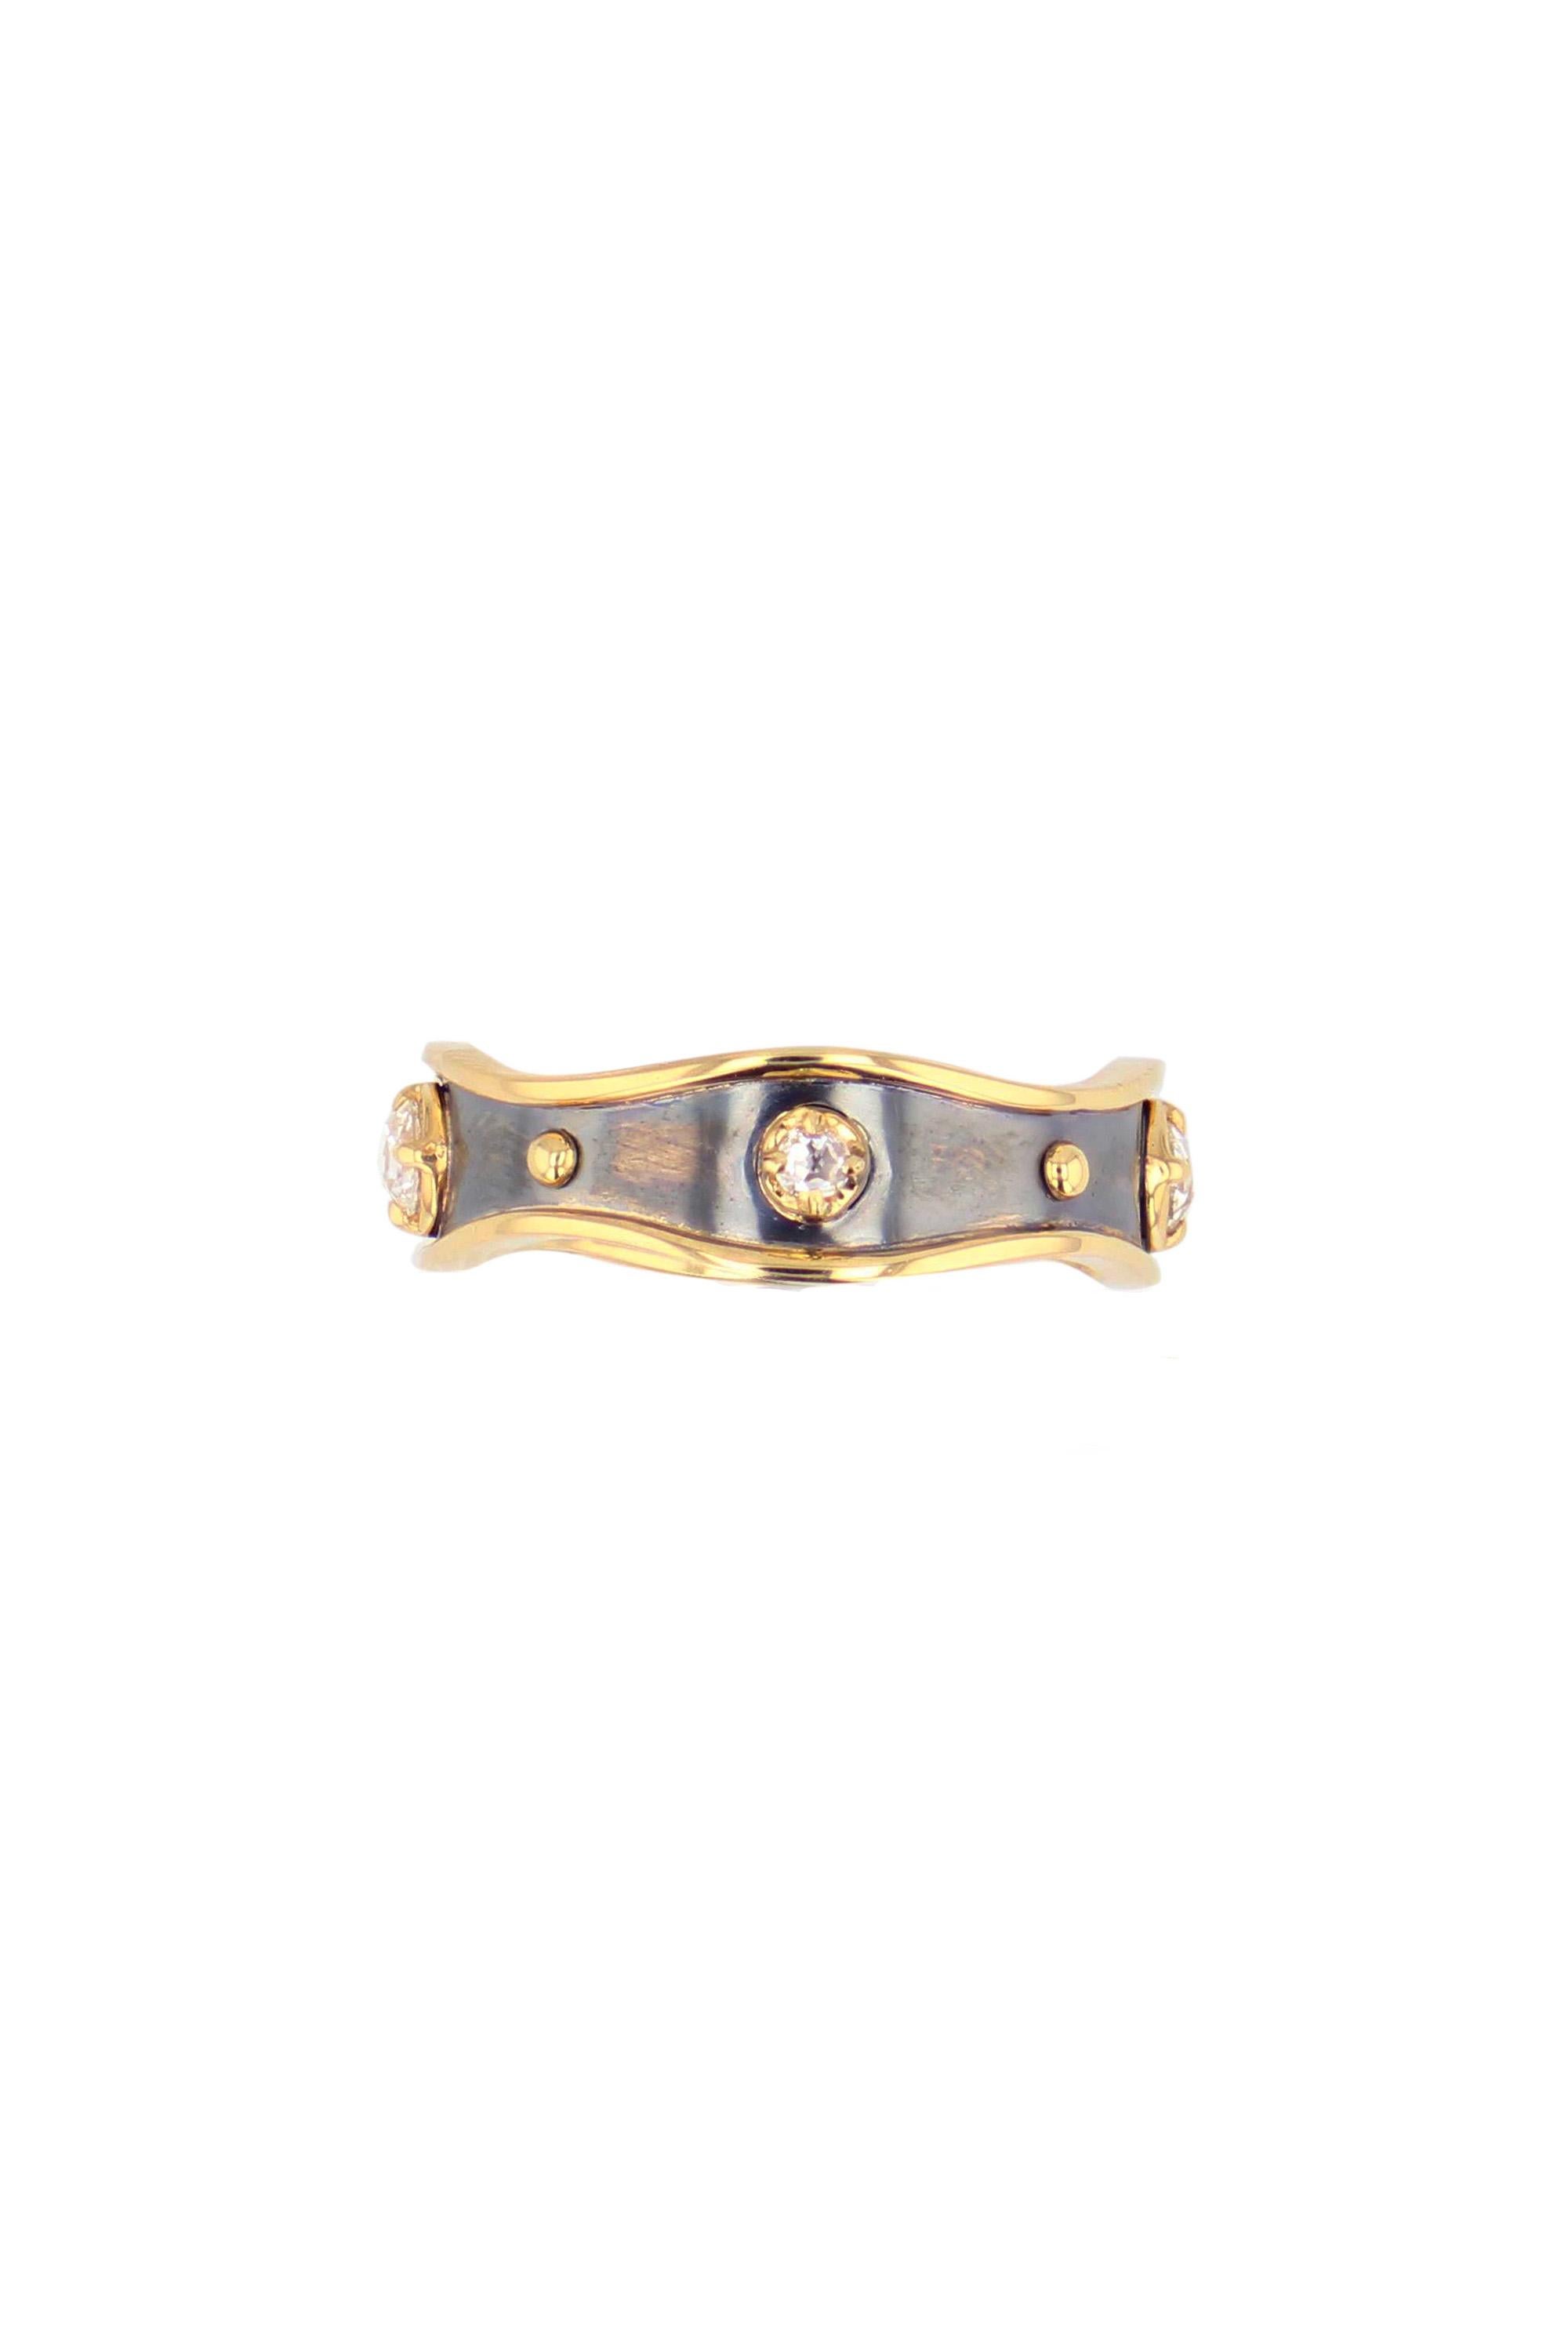 Yellow gold and distressed silver ring  studded with rose-cut diamonds.

Details:
4 Diamonds: 0,2 cts
18k Yellow Gold : 2 g    
Distressed Silver : 0,2 g 
Made in France